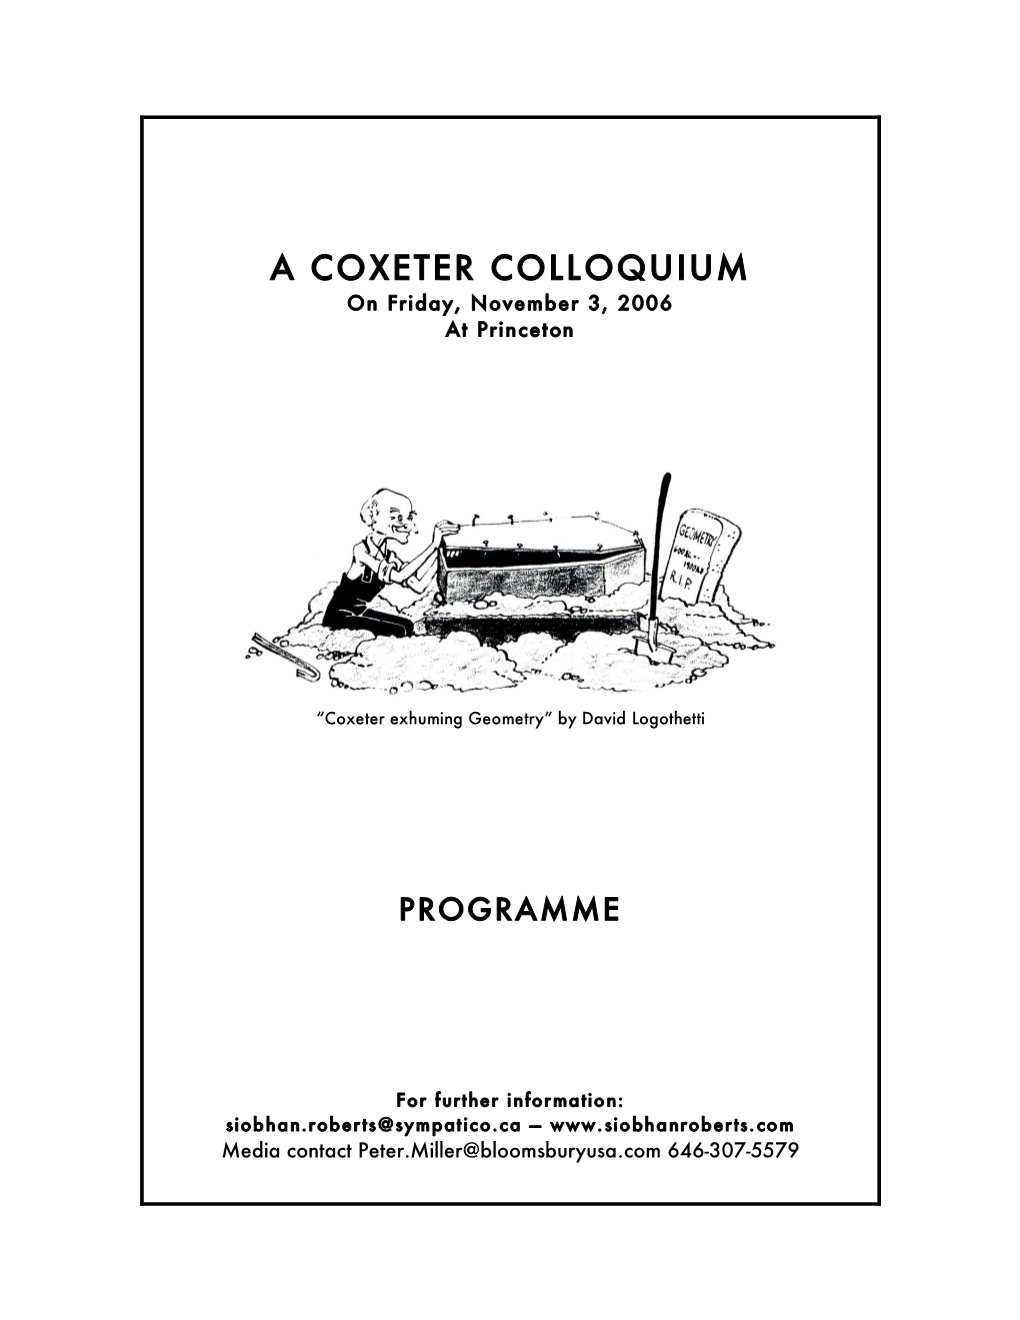 A COXETER COLLOQUIUM on Friday, November 3, 2006 at Princeton